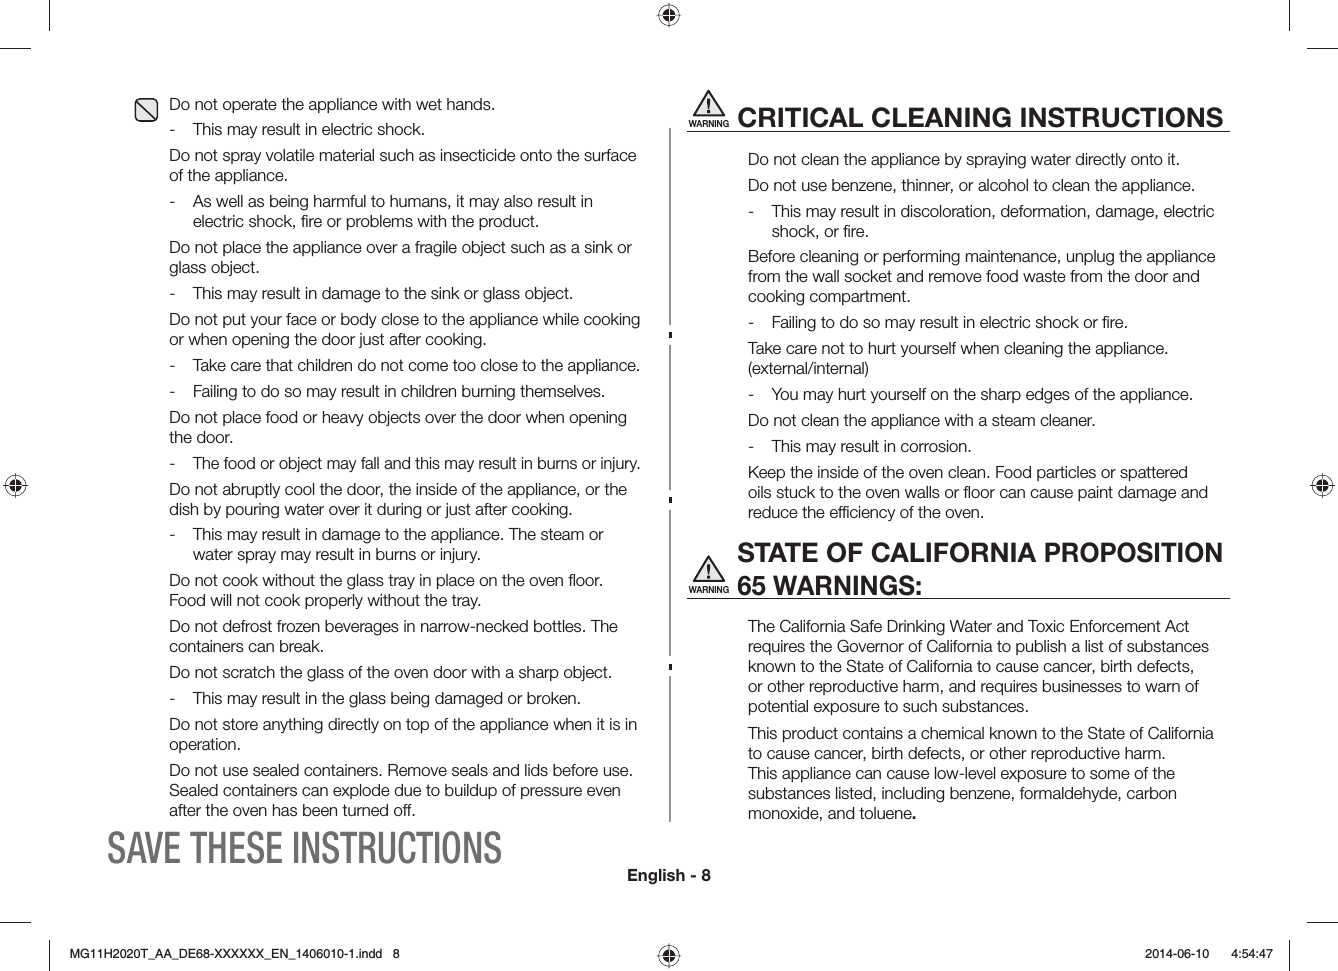 English - 8WARNINGCRITICAL CLEANING INSTRUCTIONSDo not clean the appliance by spraying water directly onto it.Do not use benzene, thinner, or alcohol to clean the appliance. -  This may result in discoloration, deformation, damage, electric shock, or ﬁre. Before cleaning or performing maintenance, unplug the appliance from the wall socket and remove food waste from the door and cooking compartment.-  Failing to do so may result in electric shock or ﬁre.Take care not to hurt yourself when cleaning the appliance. (external/internal) -  You may hurt yourself on the sharp edges of the appliance. Do not clean the appliance with a steam cleaner. -  This may result in corrosion. Keep the inside of the oven clean. Food particles or spattered oils stuck to the oven walls or ﬂoor can cause paint damage and reduce the eciency of the oven.WARNING STATE OF CALIFORNIA PROPOSITION 65 WARNINGS:The California Safe Drinking Water and Toxic Enforcement Act requires the Governor of California to publish a list of substances known to the State of California to cause cancer, birth defects, or other reproductive harm, and requires businesses to warn of potential exposure to such substances. This product contains a chemical known to the State of California to cause cancer, birth defects, or other reproductive harm. This appliance can cause low-level exposure to some of the substances listed, including benzene, formaldehyde, carbon monoxide, and toluene.Do not operate the appliance with wet hands.-  This may result in electric shock. Do not spray volatile material such as insecticide onto the surface of the appliance.-  As well as being harmful to humans, it may also result in electric shock, ﬁre or problems with the product. Do not place the appliance over a fragile object such as a sink or glass object. -  This may result in damage to the sink or glass object.Do not put your face or body close to the appliance while cooking or when opening the door just after cooking.- Take care that children do not come too close to the appliance.-  Failing to do so may result in children burning themselves. Do not place food or heavy objects over the door when opening the door.- The food or object may fall and this may result in burns or injury. Do not abruptly cool the door, the inside of the appliance, or the dish by pouring water over it during or just after cooking.-  This may result in damage to the appliance. The steam or water spray may result in burns or injury.Do not cook without the glass tray in place on the oven ﬂoor. Food will not cook properly without the tray. Do not defrost frozen beverages in narrow-necked bottles. The containers can break.Do not scratch the glass of the oven door with a sharp object.-  This may result in the glass being damaged or broken.Do not store anything directly on top of the appliance when it is in operation.Do not use sealed containers. Remove seals and lids before use. Sealed containers can explode due to buildup of pressure even after the oven has been turned o.SAVE THESE INSTRUCTIONS/)*6A##A&amp;&apos;::::::A&apos;0AKPFF  